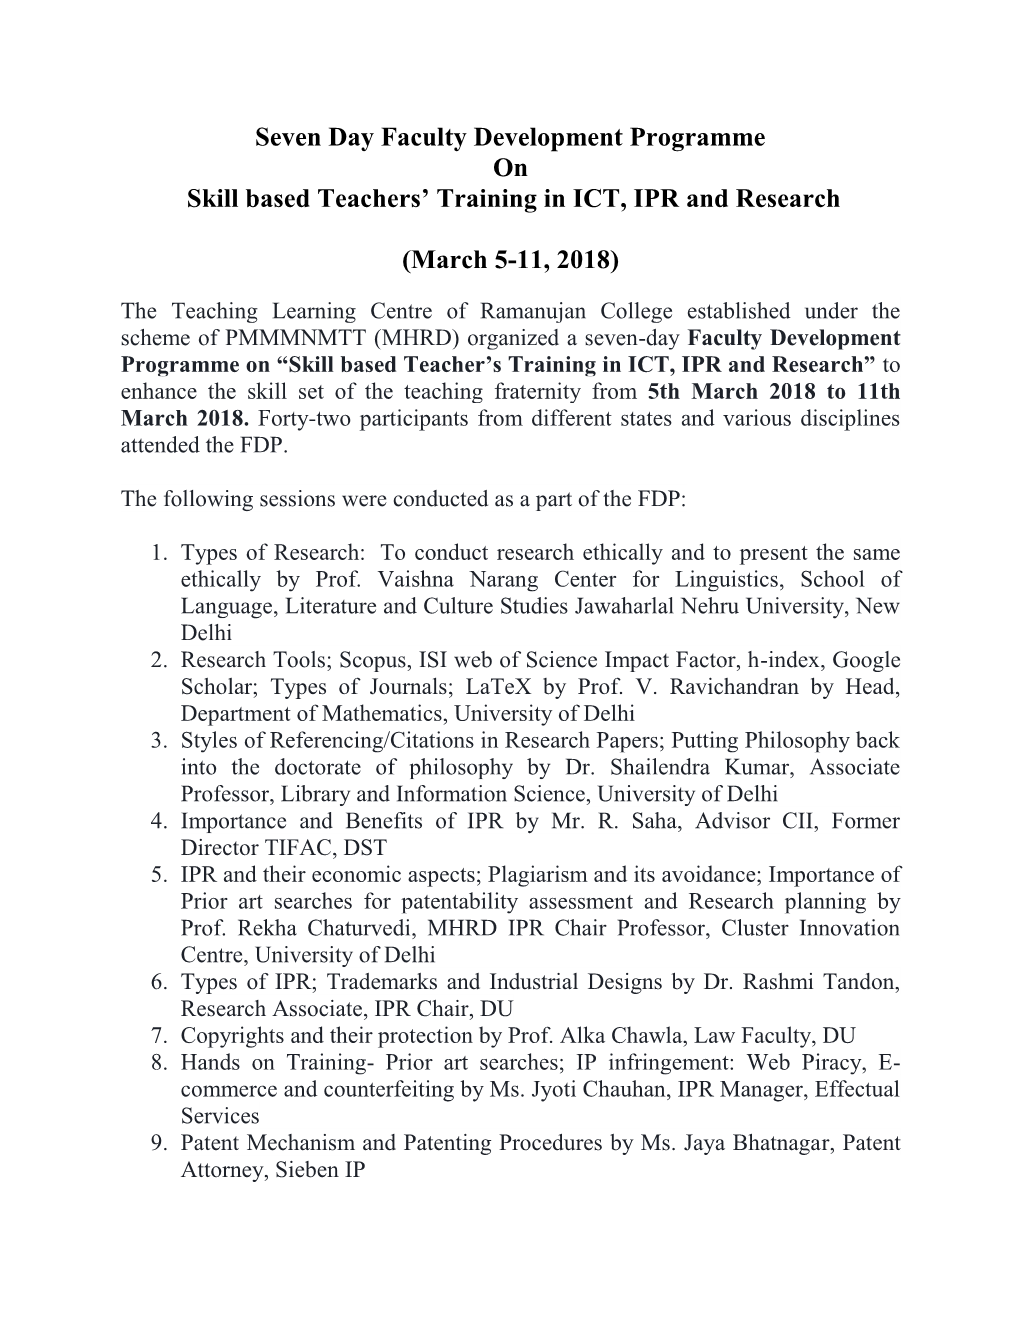 Seven Day Faculty Development Programme on Skill Based Teachers’ Training in ICT, IPR and Research